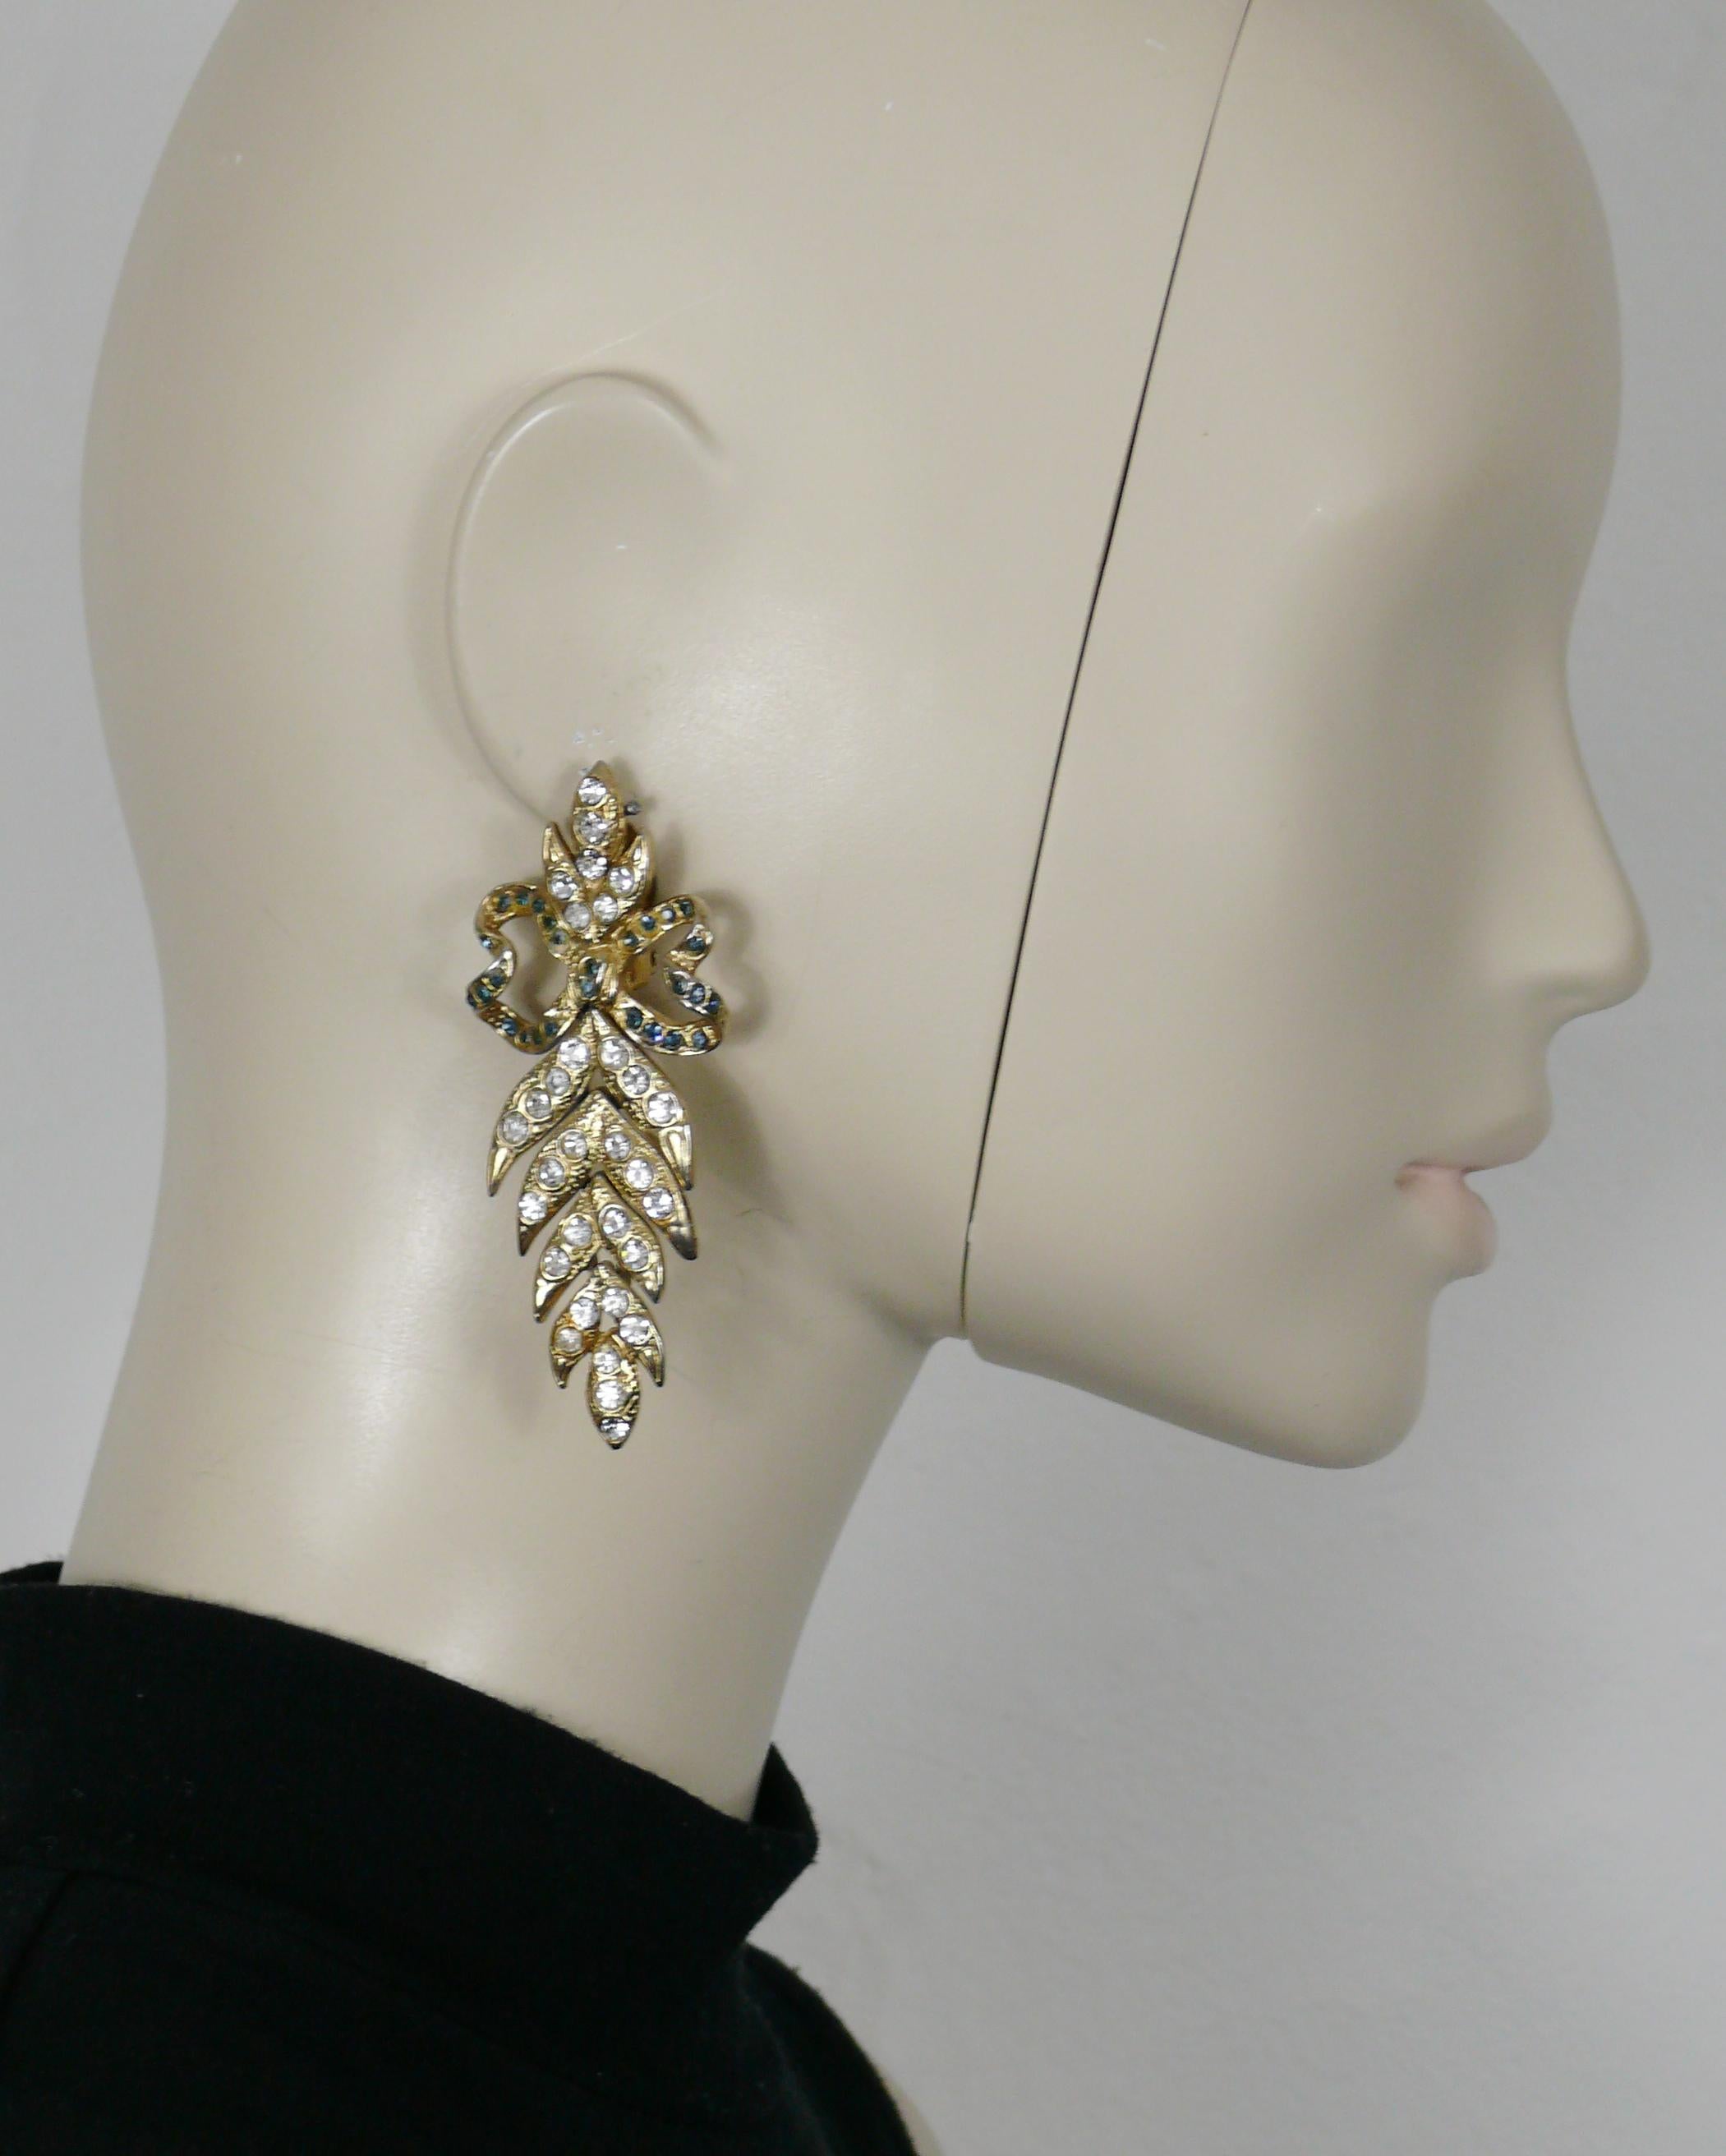 YVES SAINT LAURENT vintage dangling earrings (clip-on) featuring a bow embellished with blue crystals and articulated leaf embellished with clear rhinestones.

Embossed YSL.

Indicative measurements : length approx. 8 cm (3.15 inches) / max. width